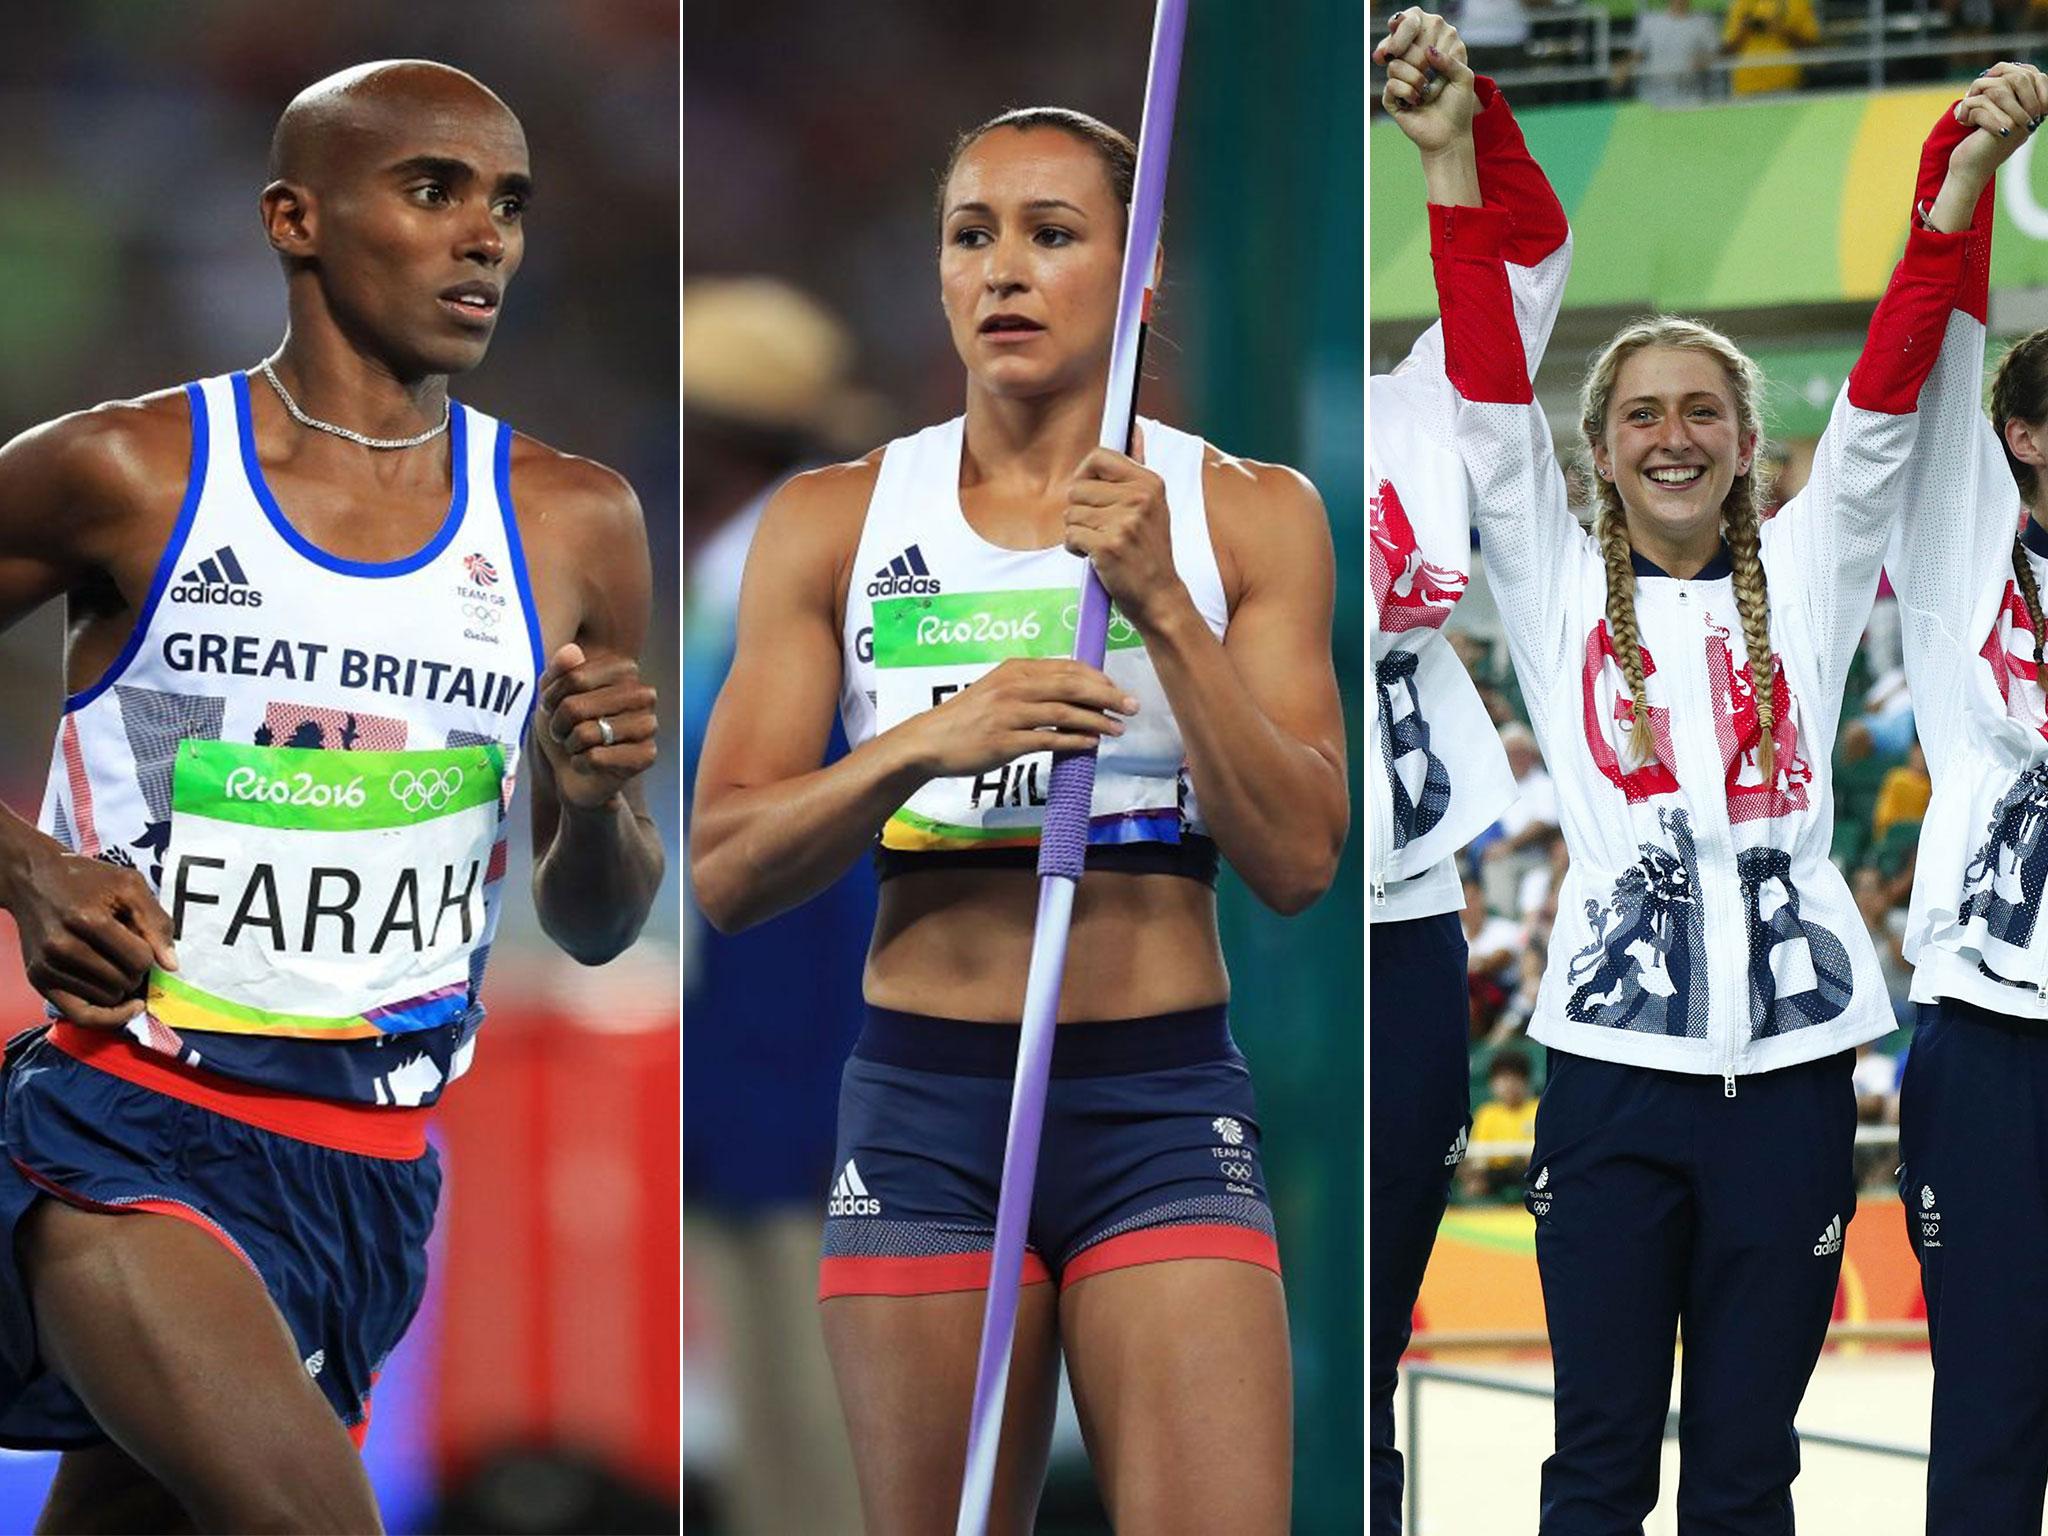 Team GB has enjoyed a rush of medals this weekend